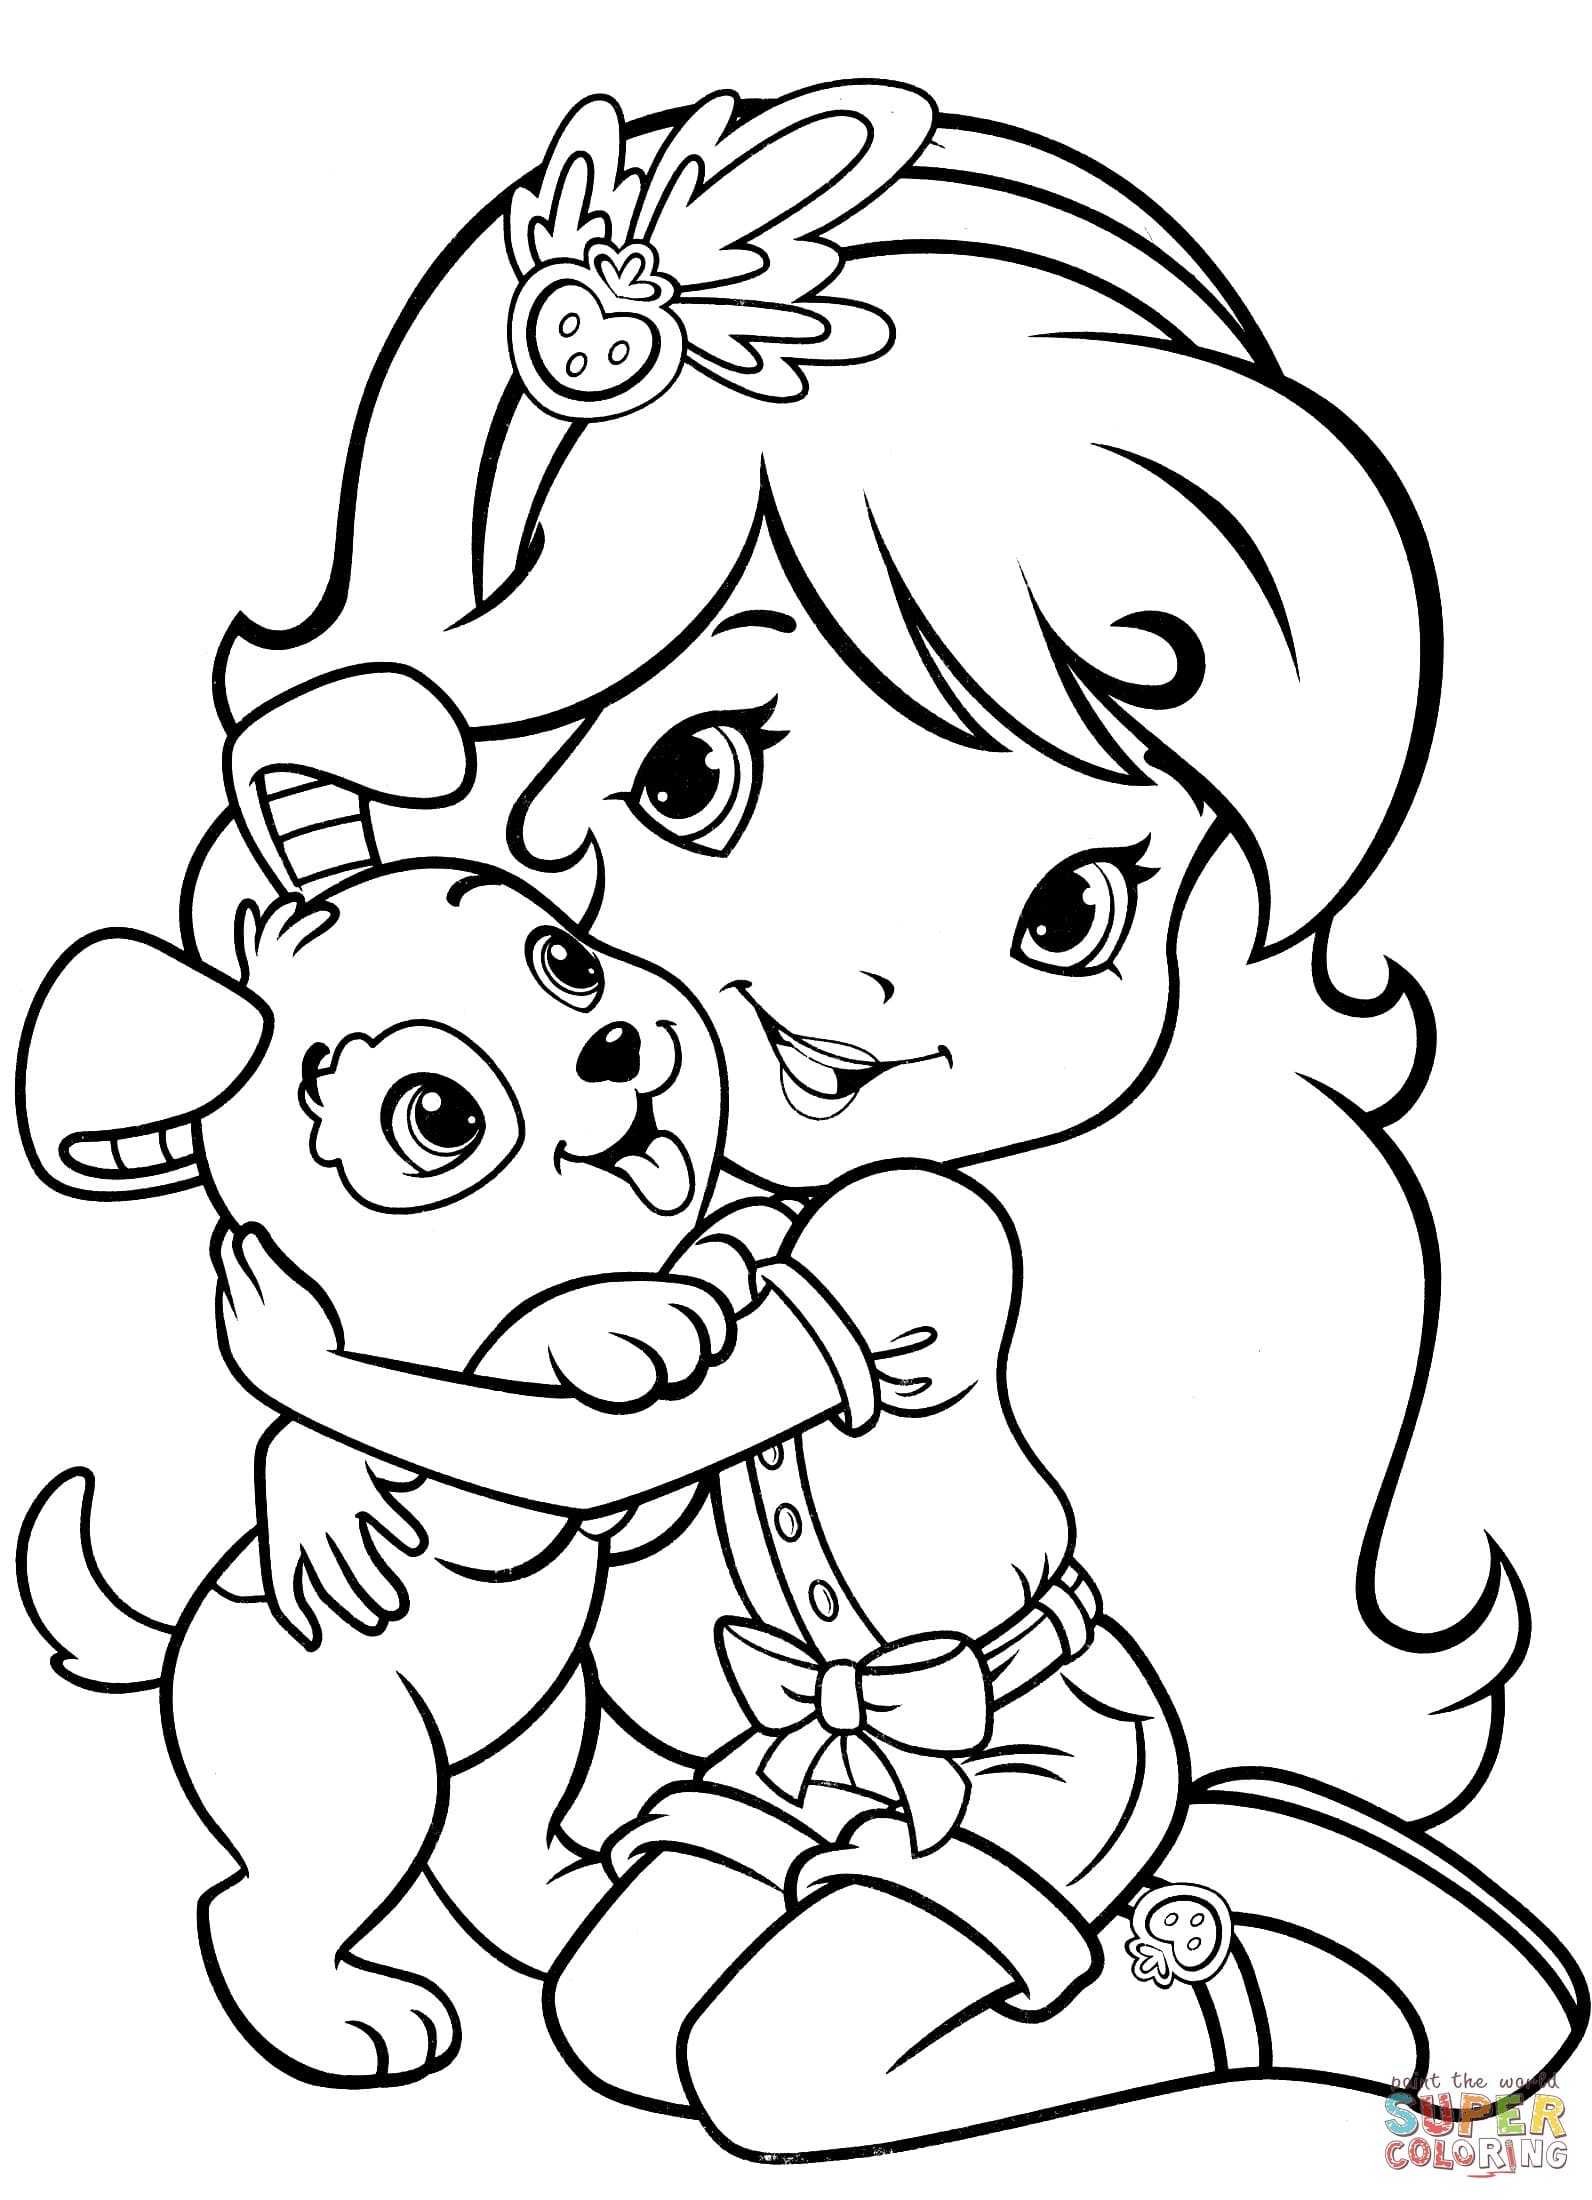 Pupcake and strawberry shortcake coloring page